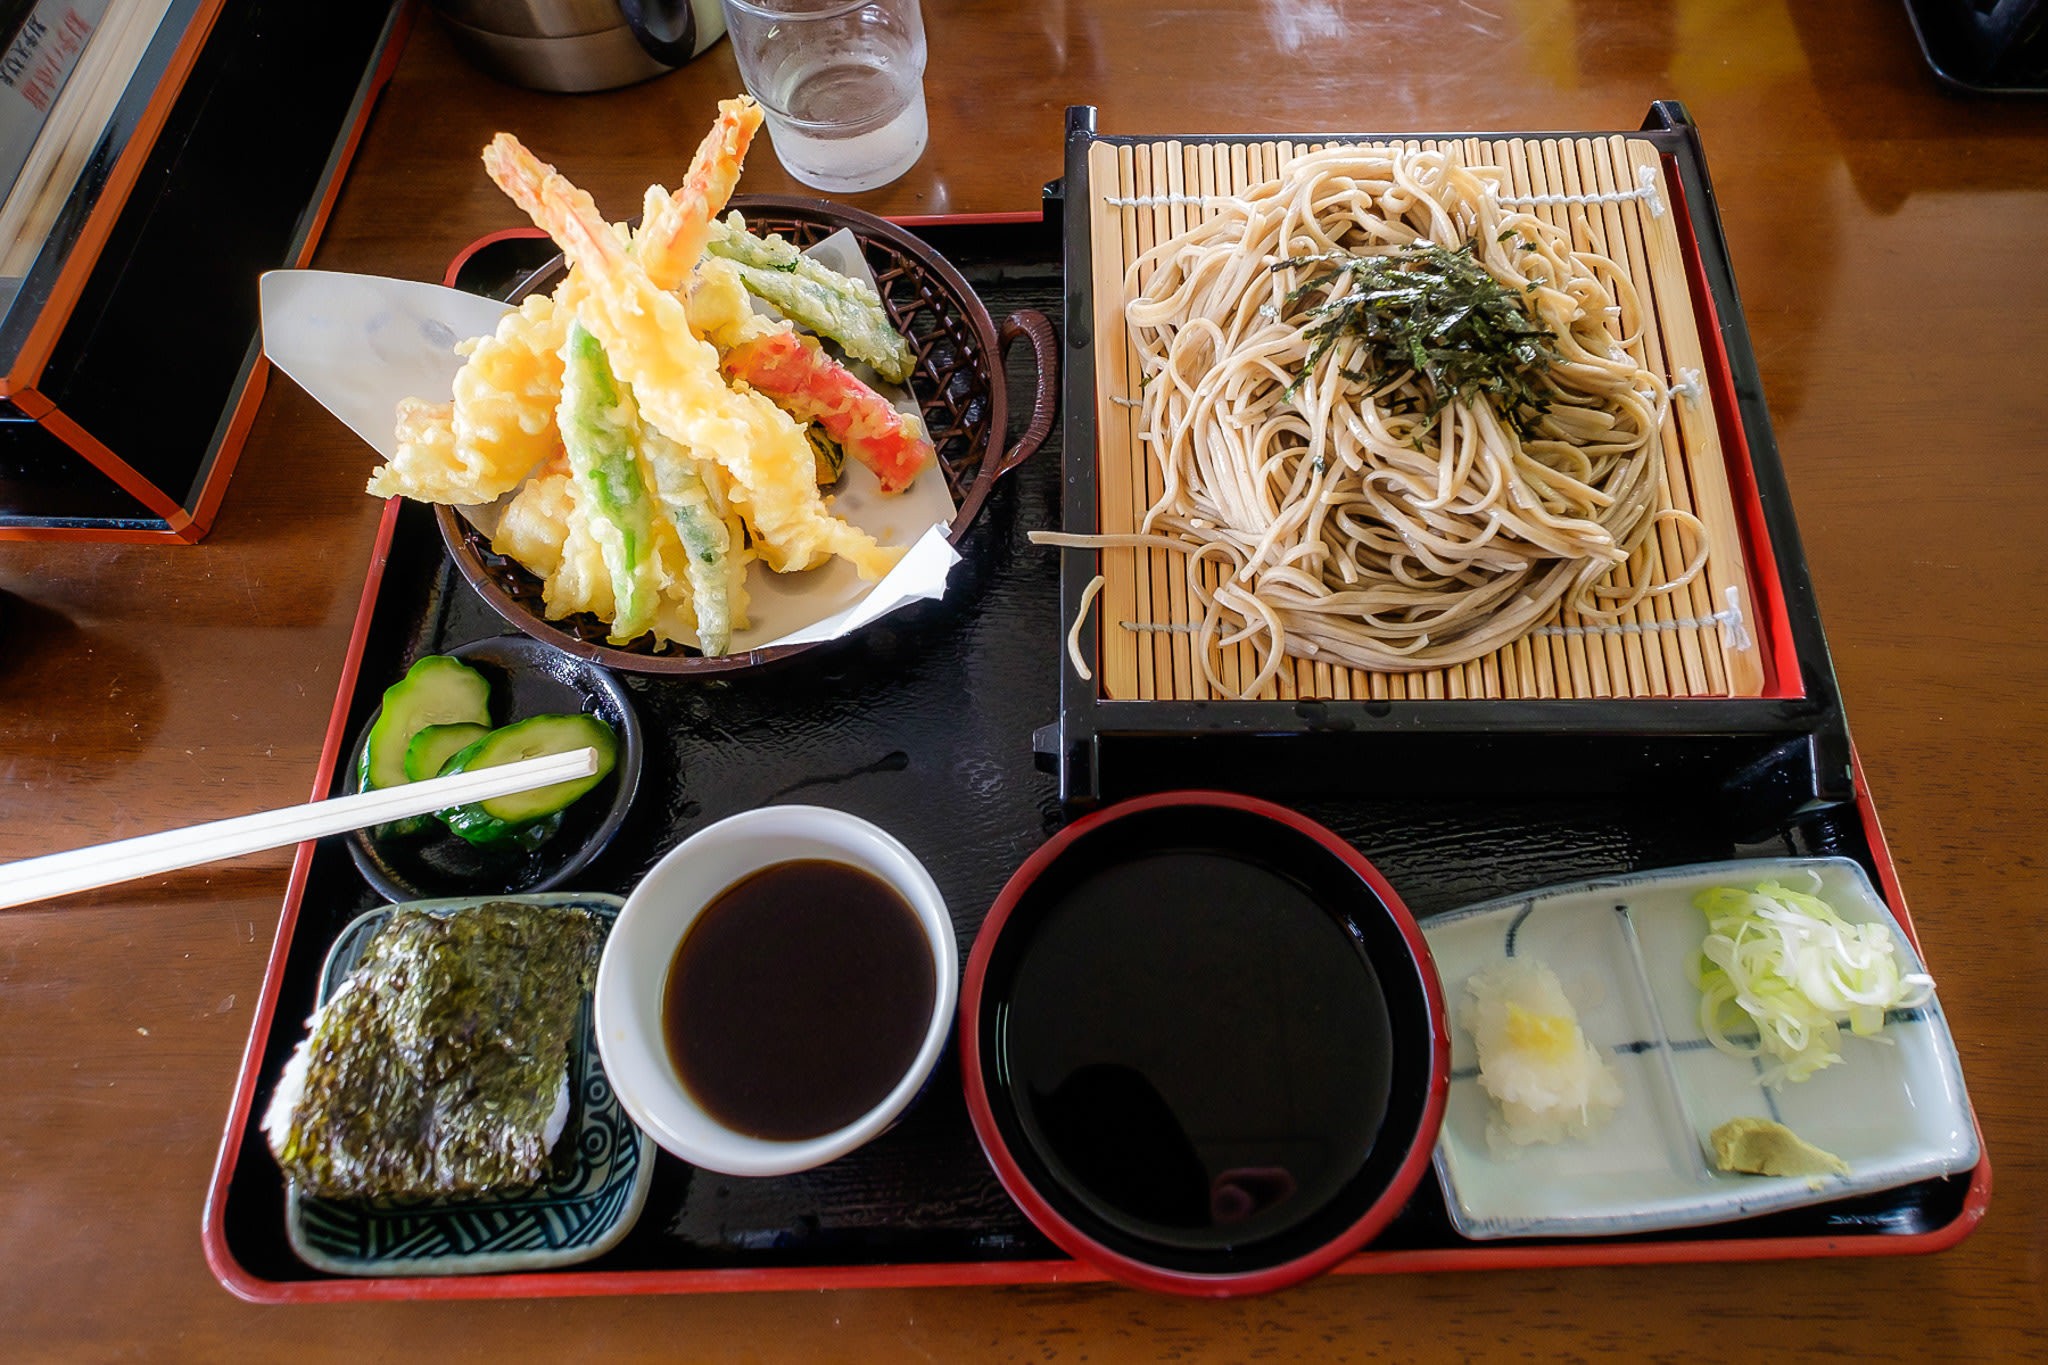 A Japanese "teishoku" style dish, with a small rice bowl, soba noodles, tempura, cucumber pickles and a dipping sauce for both noodles and tempura. There are toppings for the soba noodles on small plates.